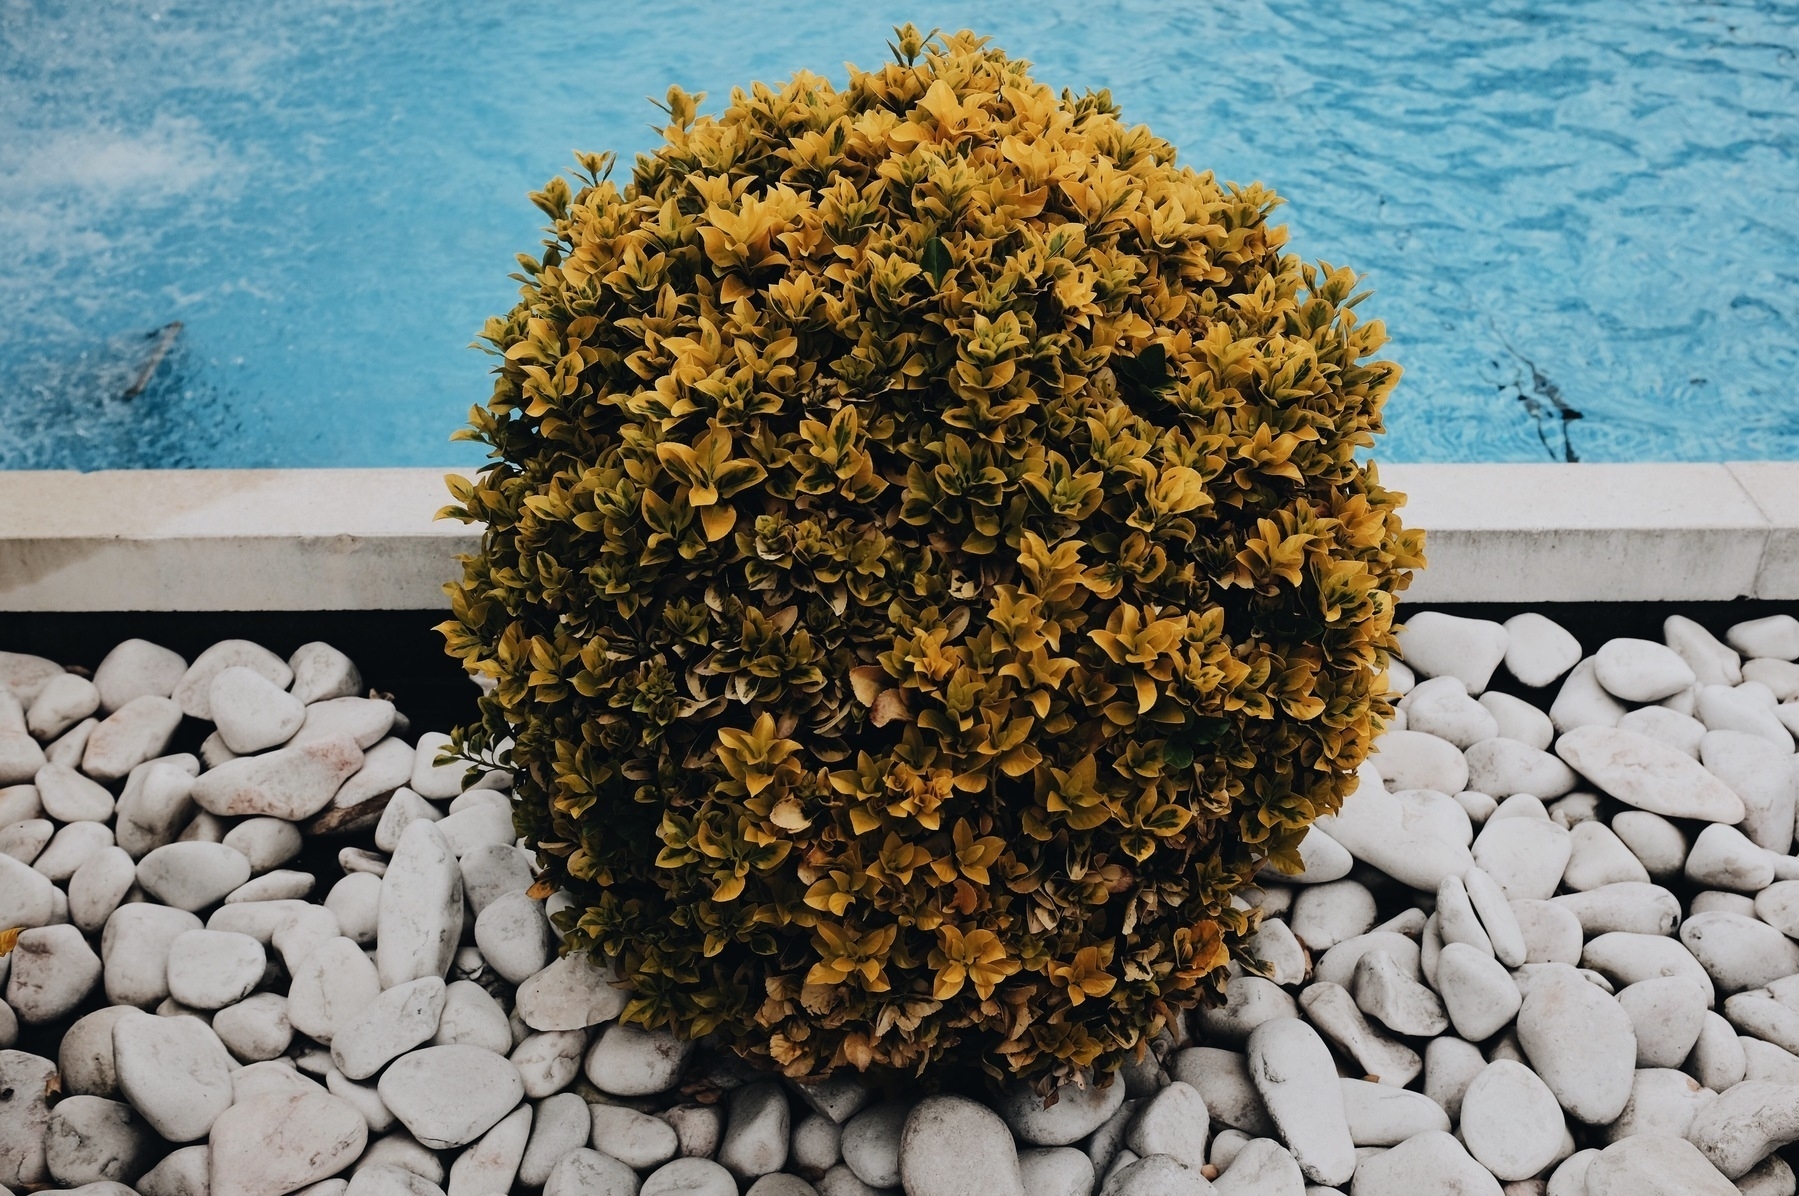 a round yellow potted plant, a pool in the background.